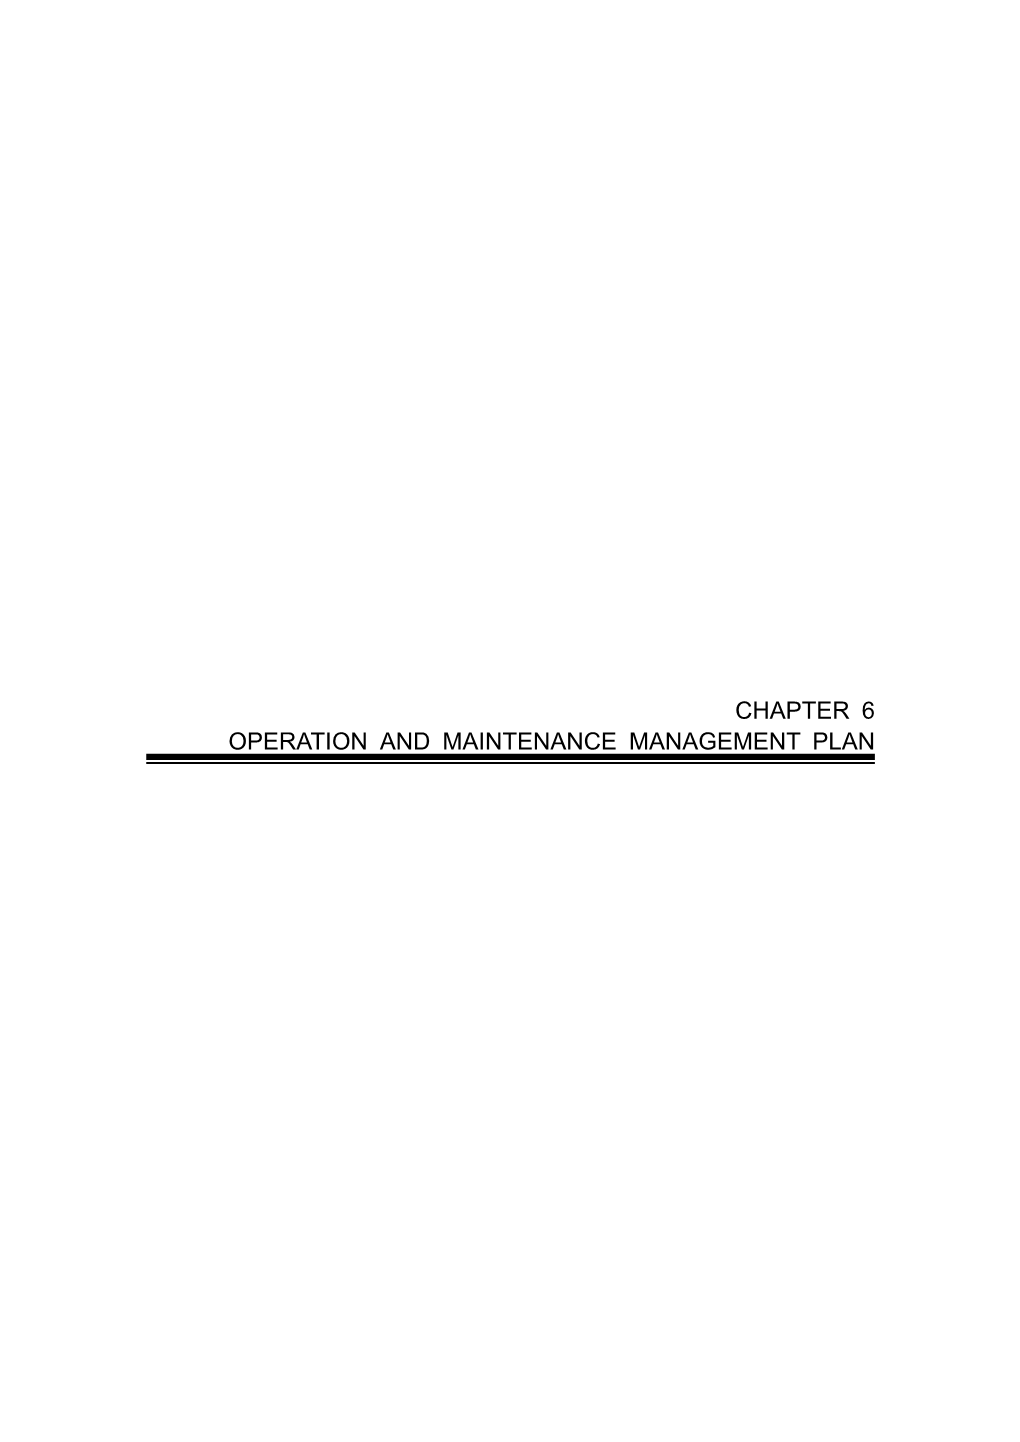 Chapter 6 Operation and Maintenance Management Plan